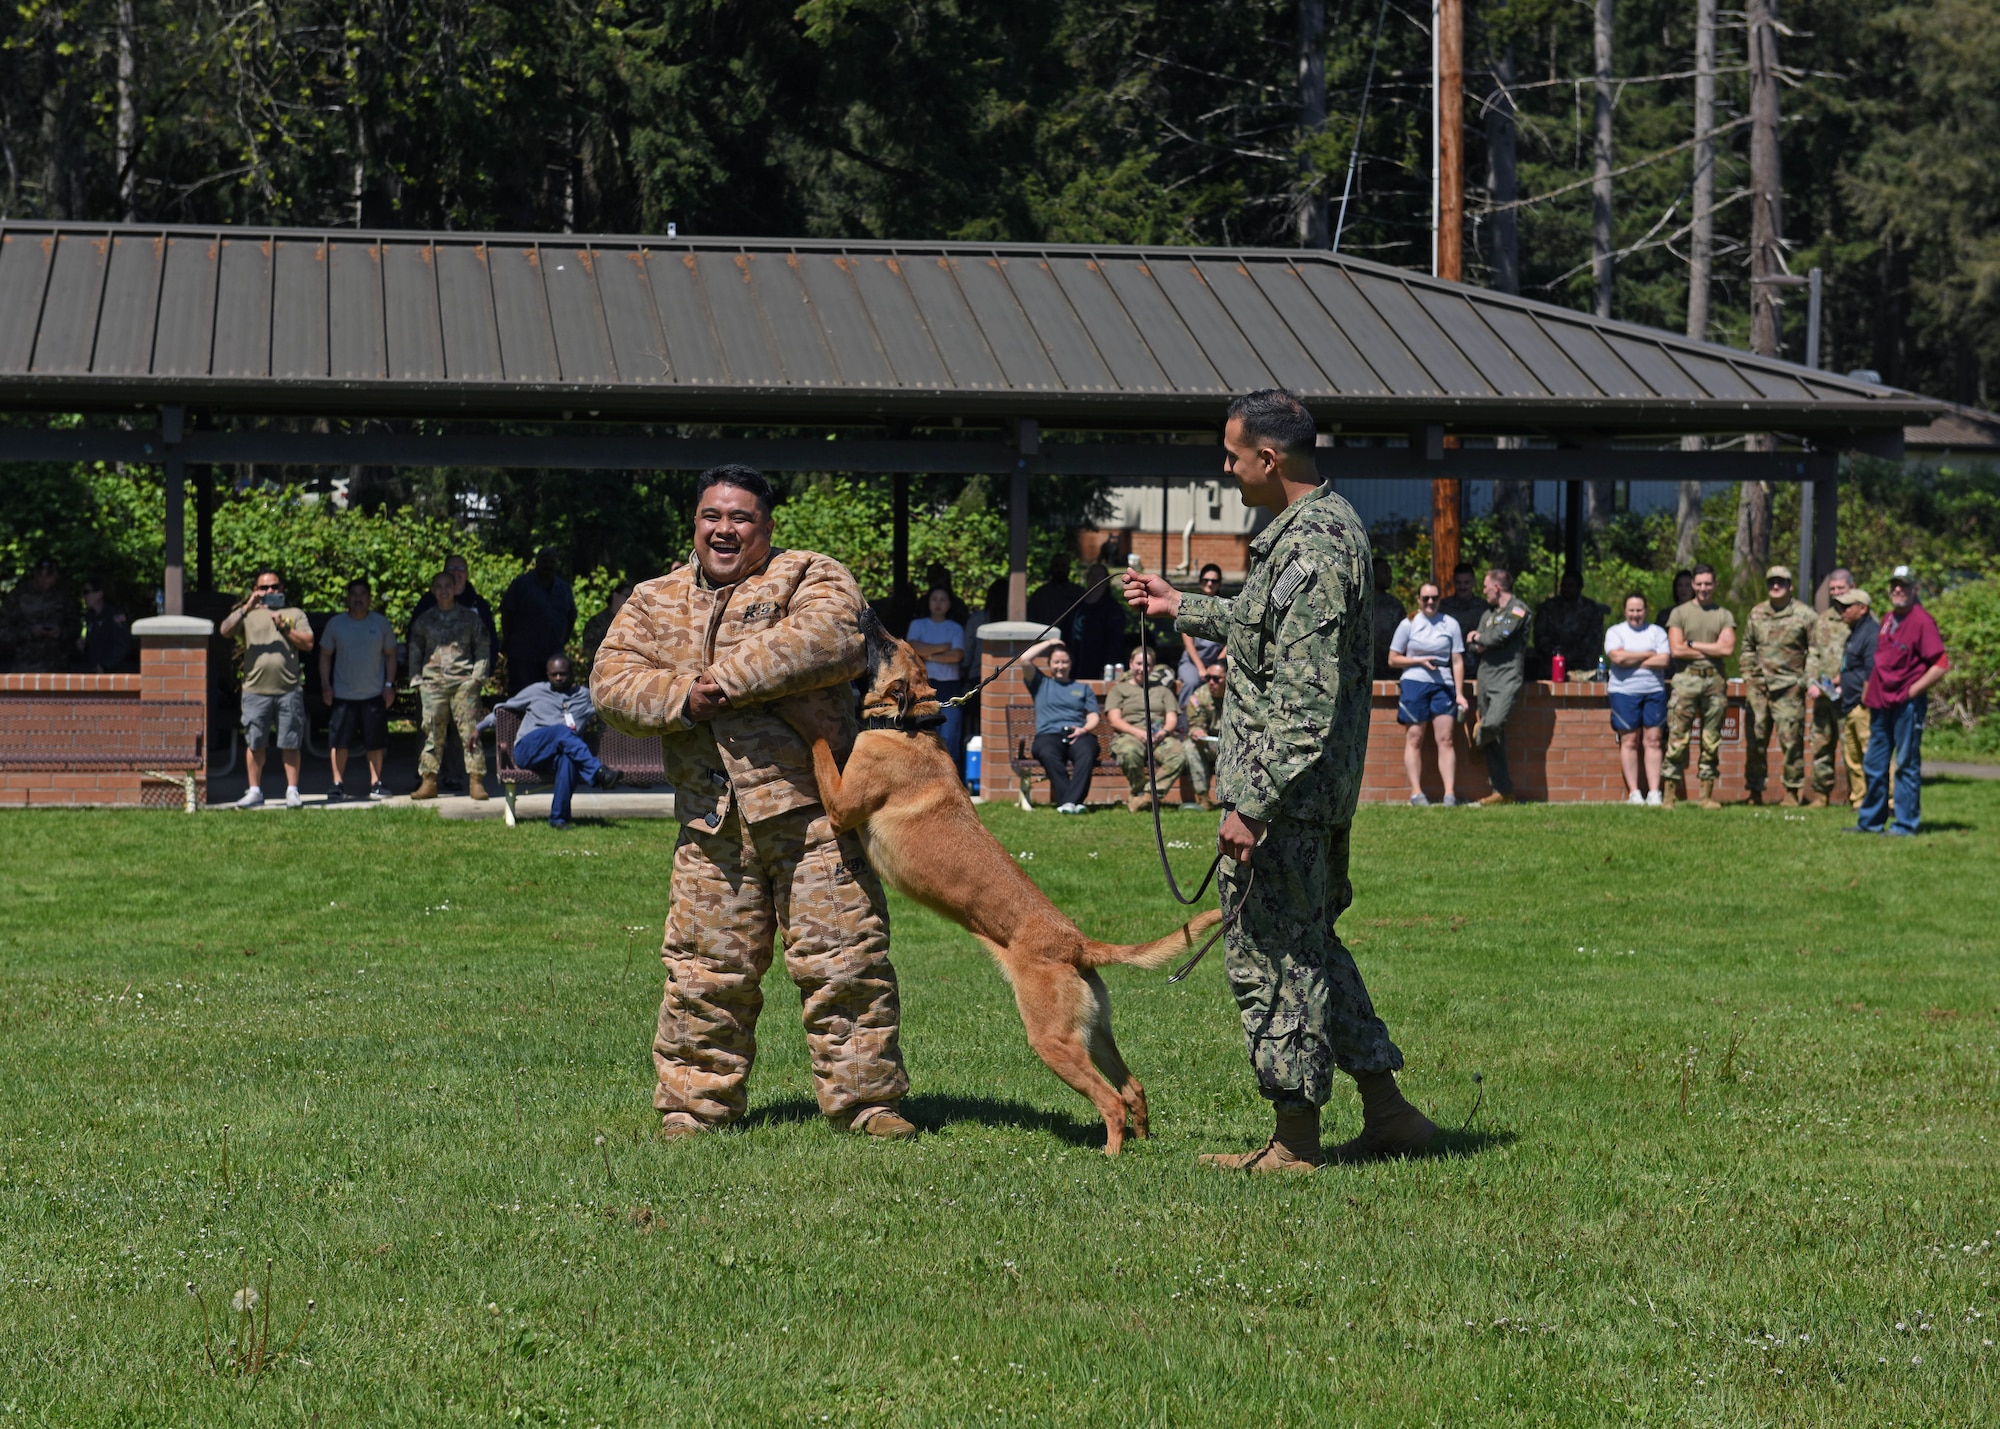 A U.S. Air Force Airman with the 62d Medical Squadron participates in a Naval Base Kitsap Security Department K9 demonstration hosted during Nurse-Technician Appreciation Week at Joint Base Lewis-McChord, Washington, May 10, 2023. The 62d MDS held several events spanning the week in appreciation for their nurses and technicians: including the K9 demonstration, raffles and lunches. (U.S. Air Force photo by Staff Sgt. Zoe Thacker)